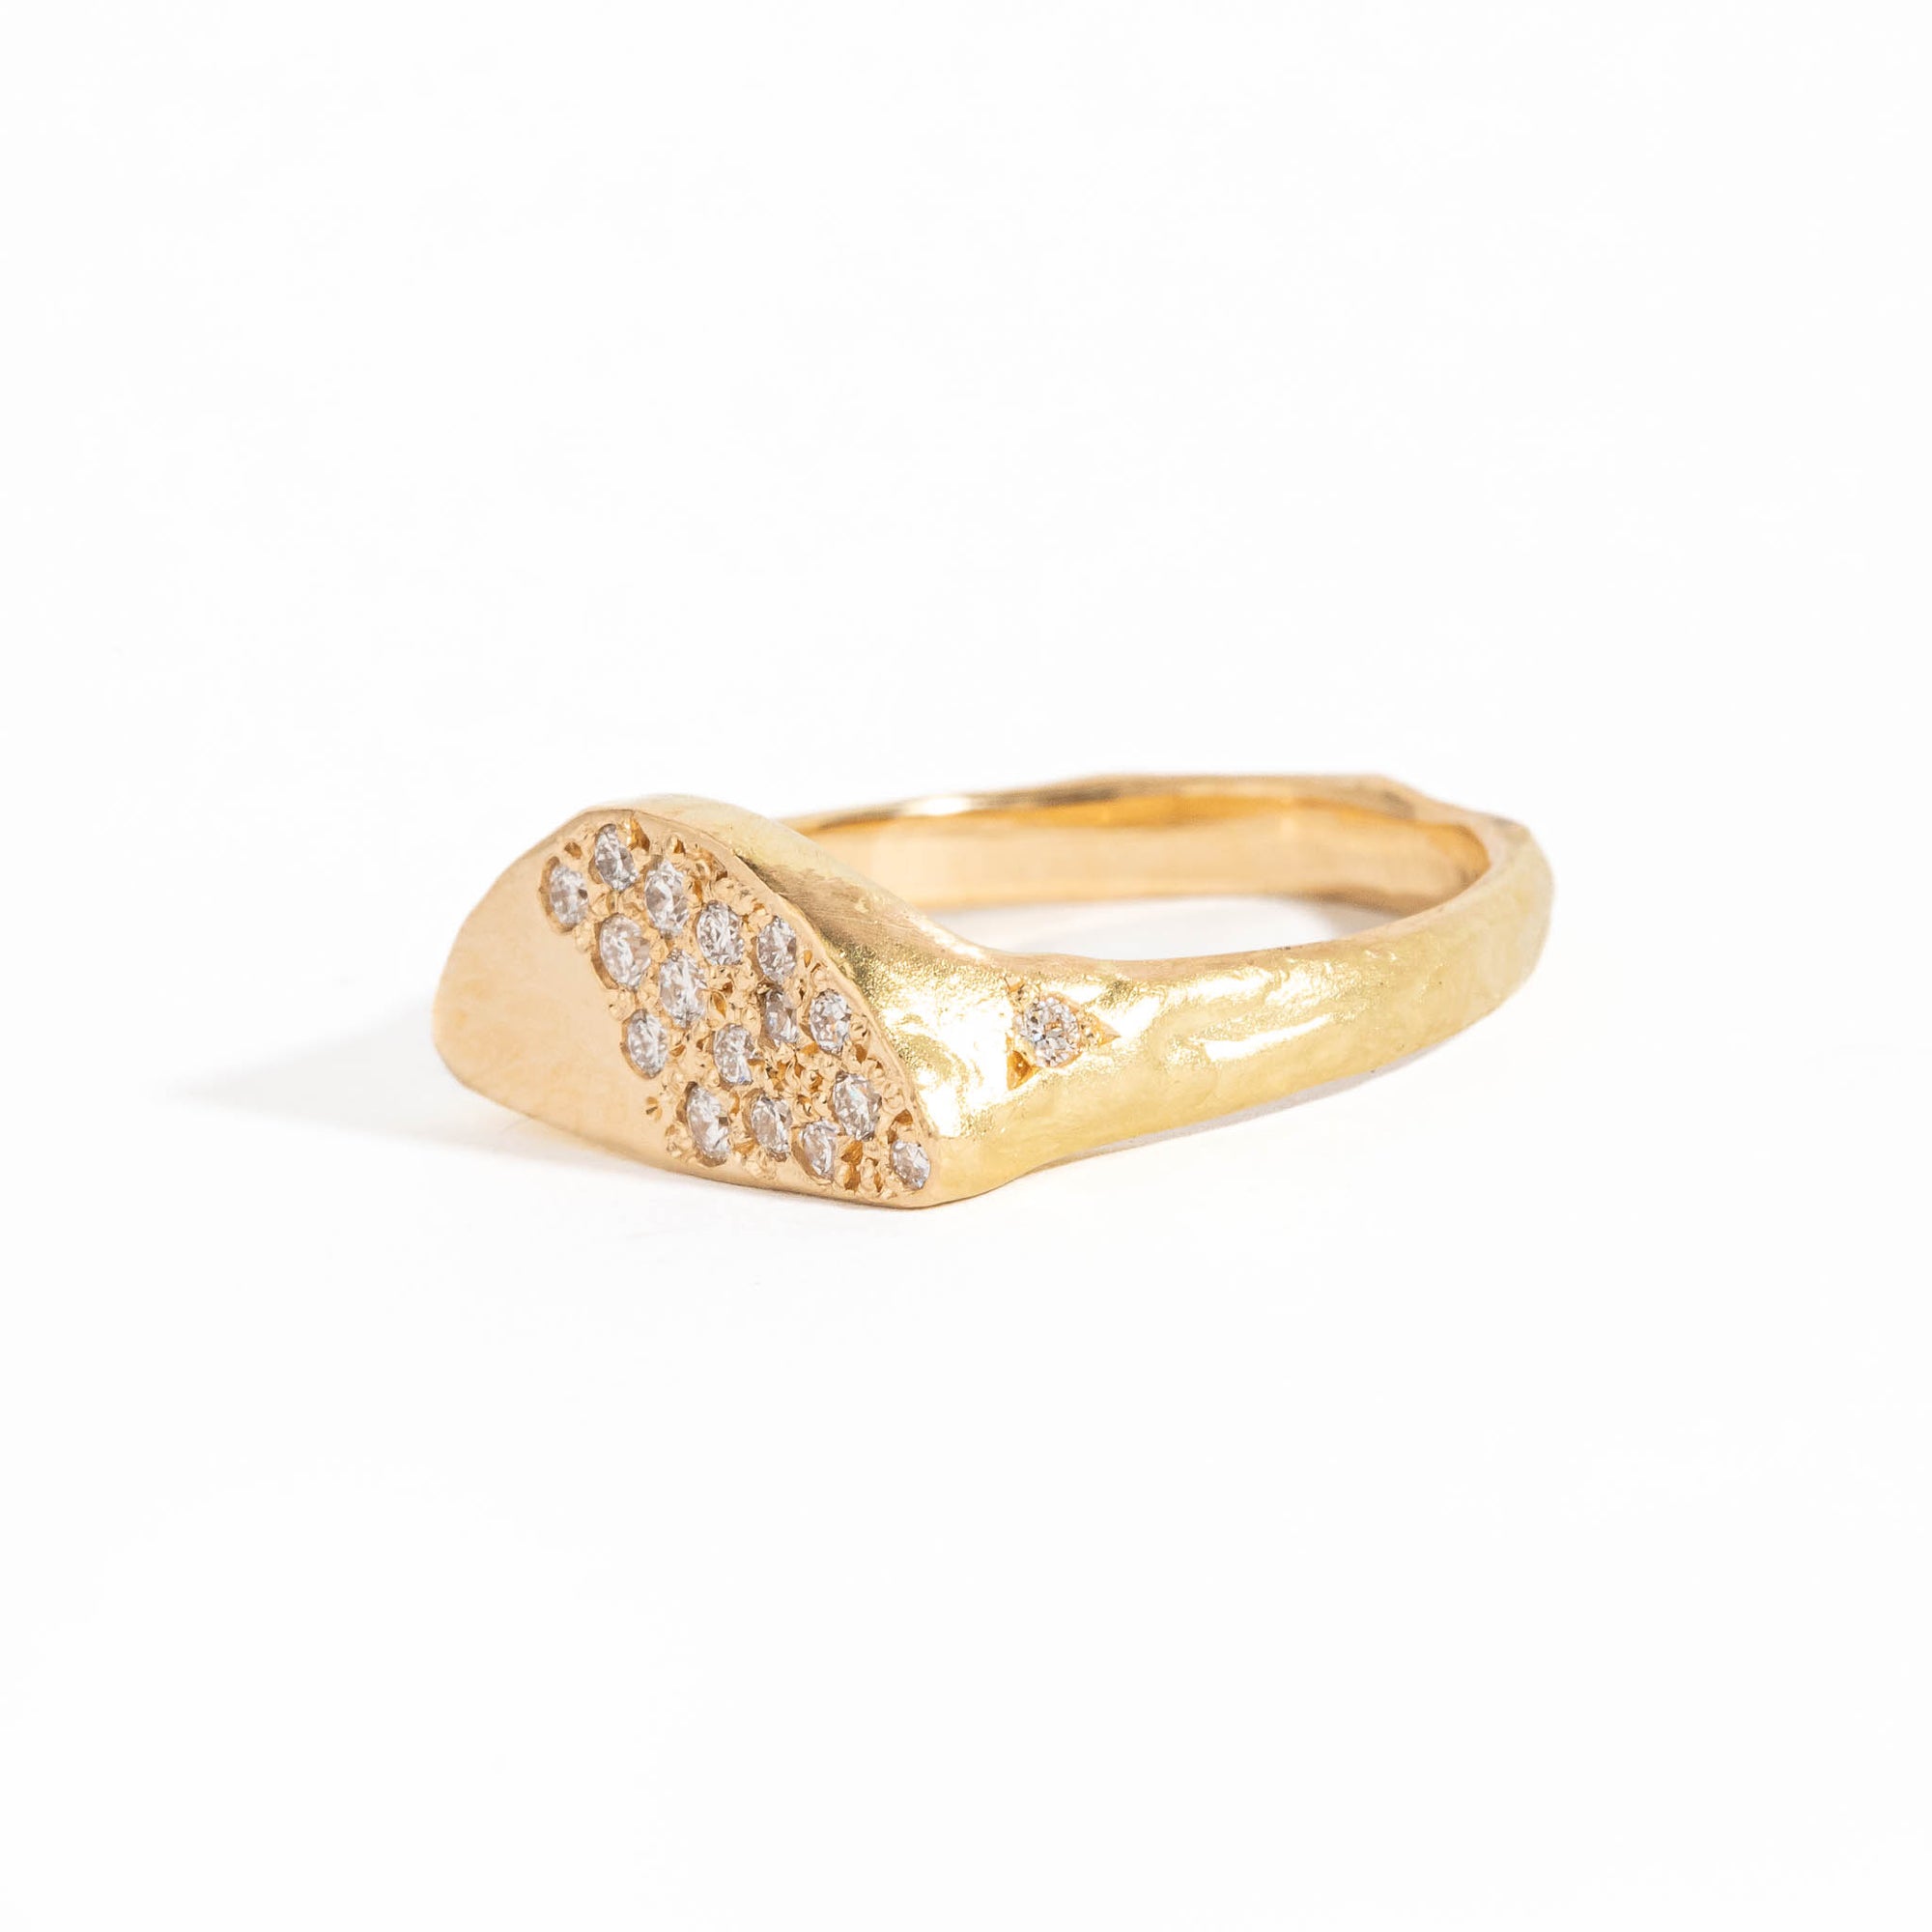 Crescent White Diamond Signet Ring in 18ct Yellow Gold